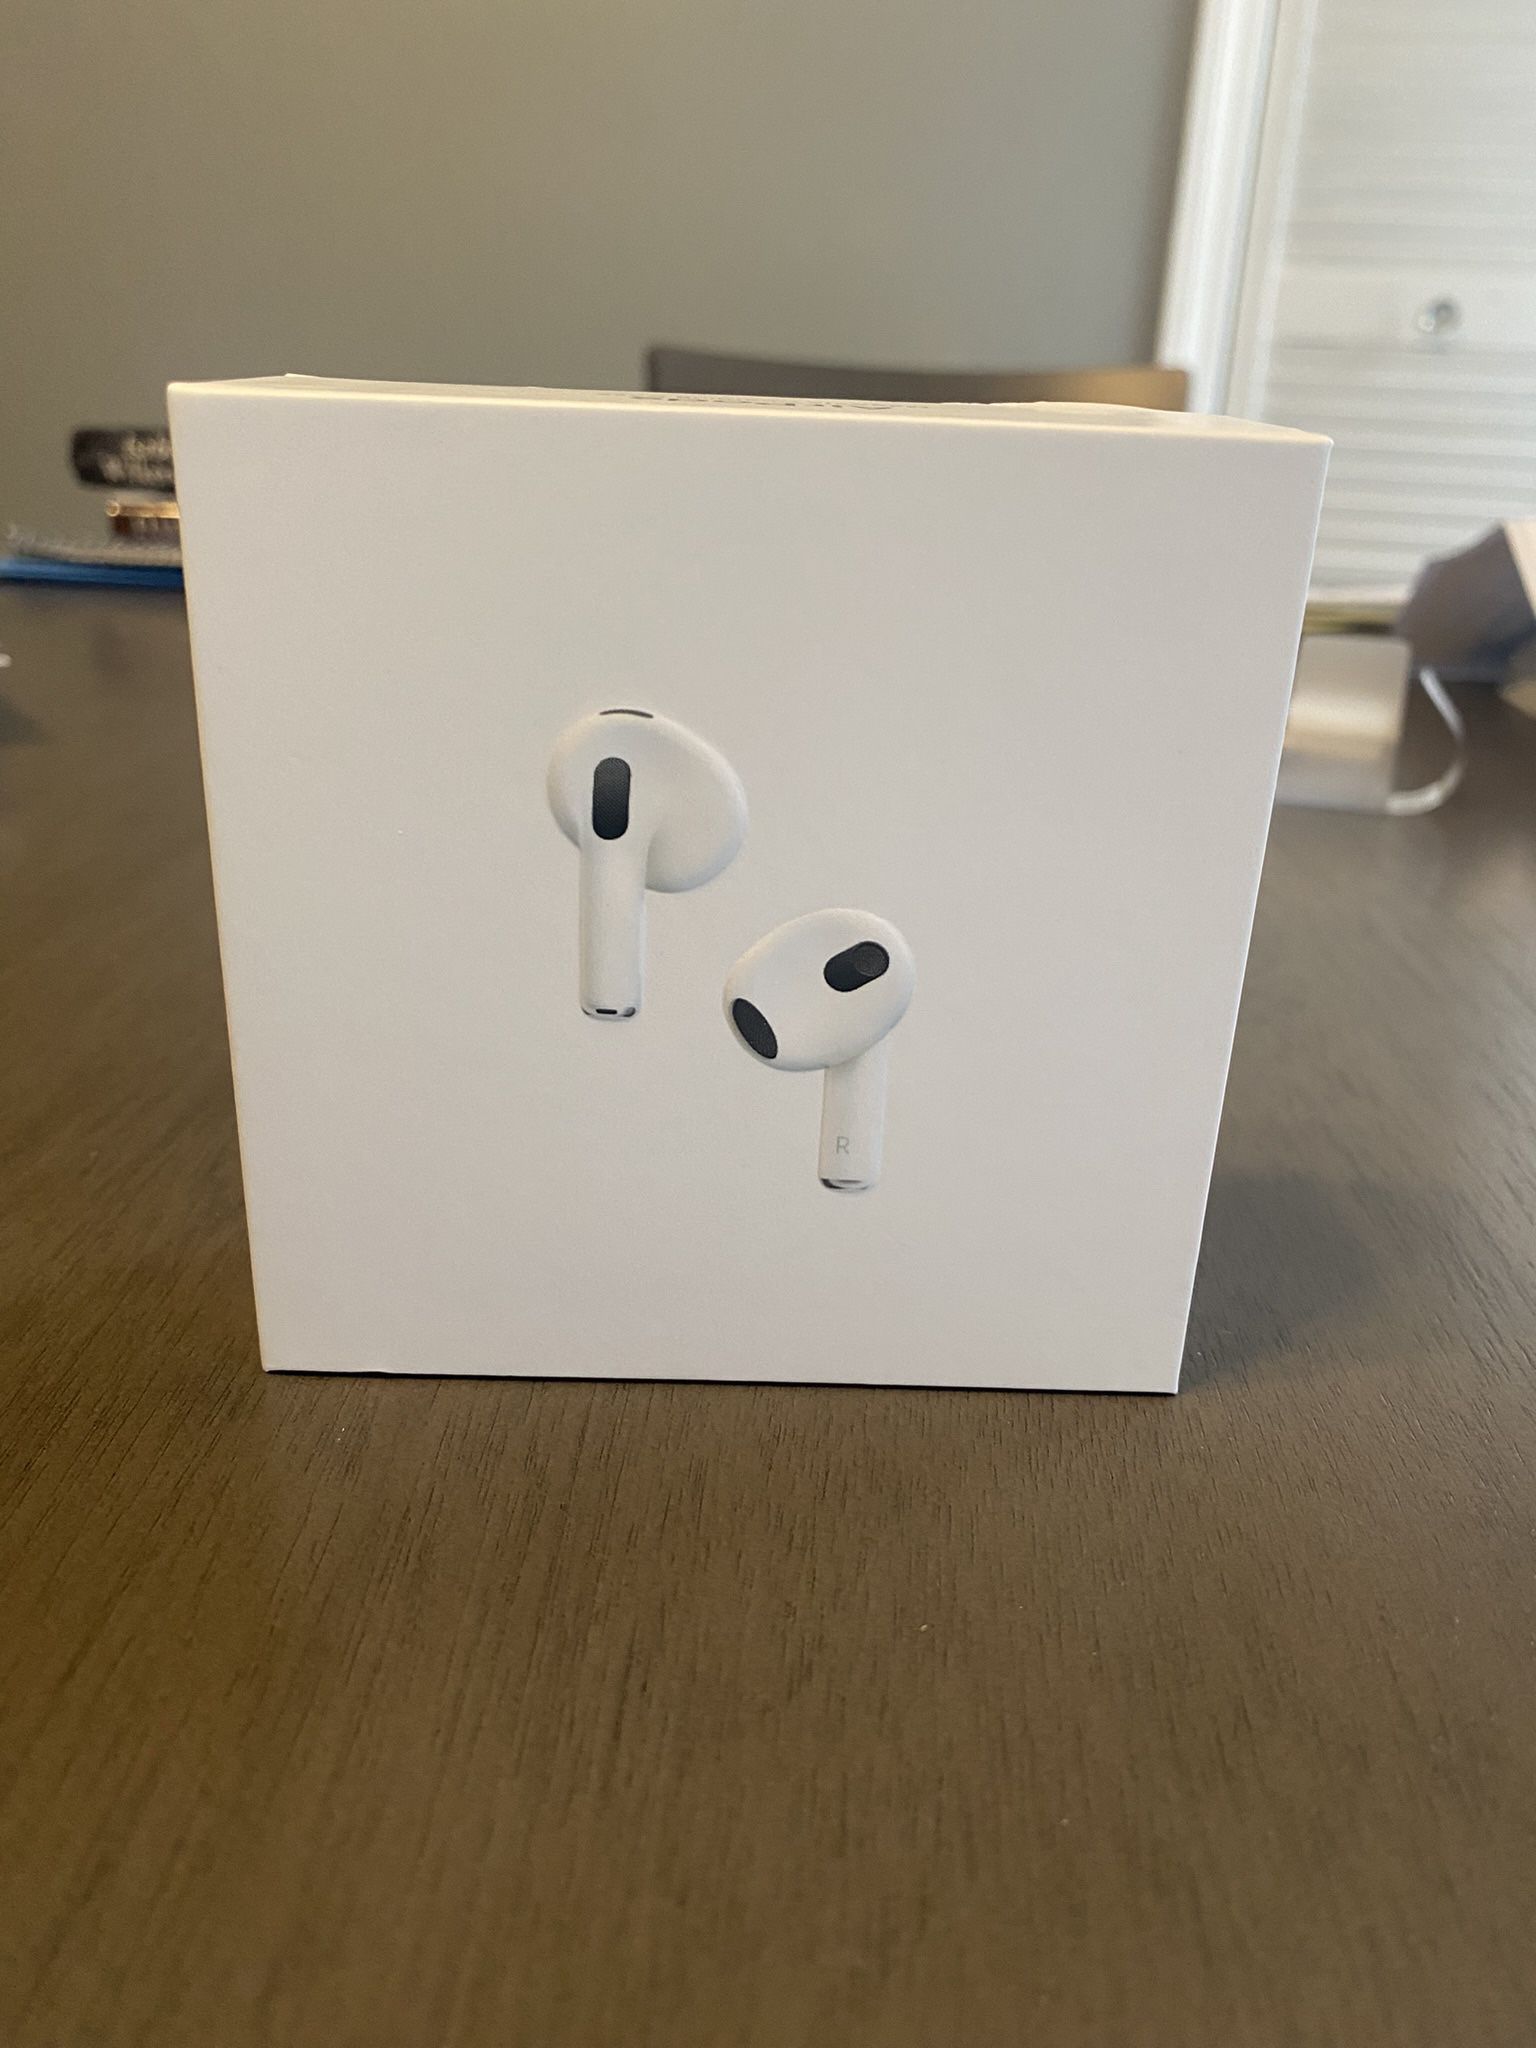 2 For 100.00 NEW IN BOX AIRPODS 3 GENERATION 